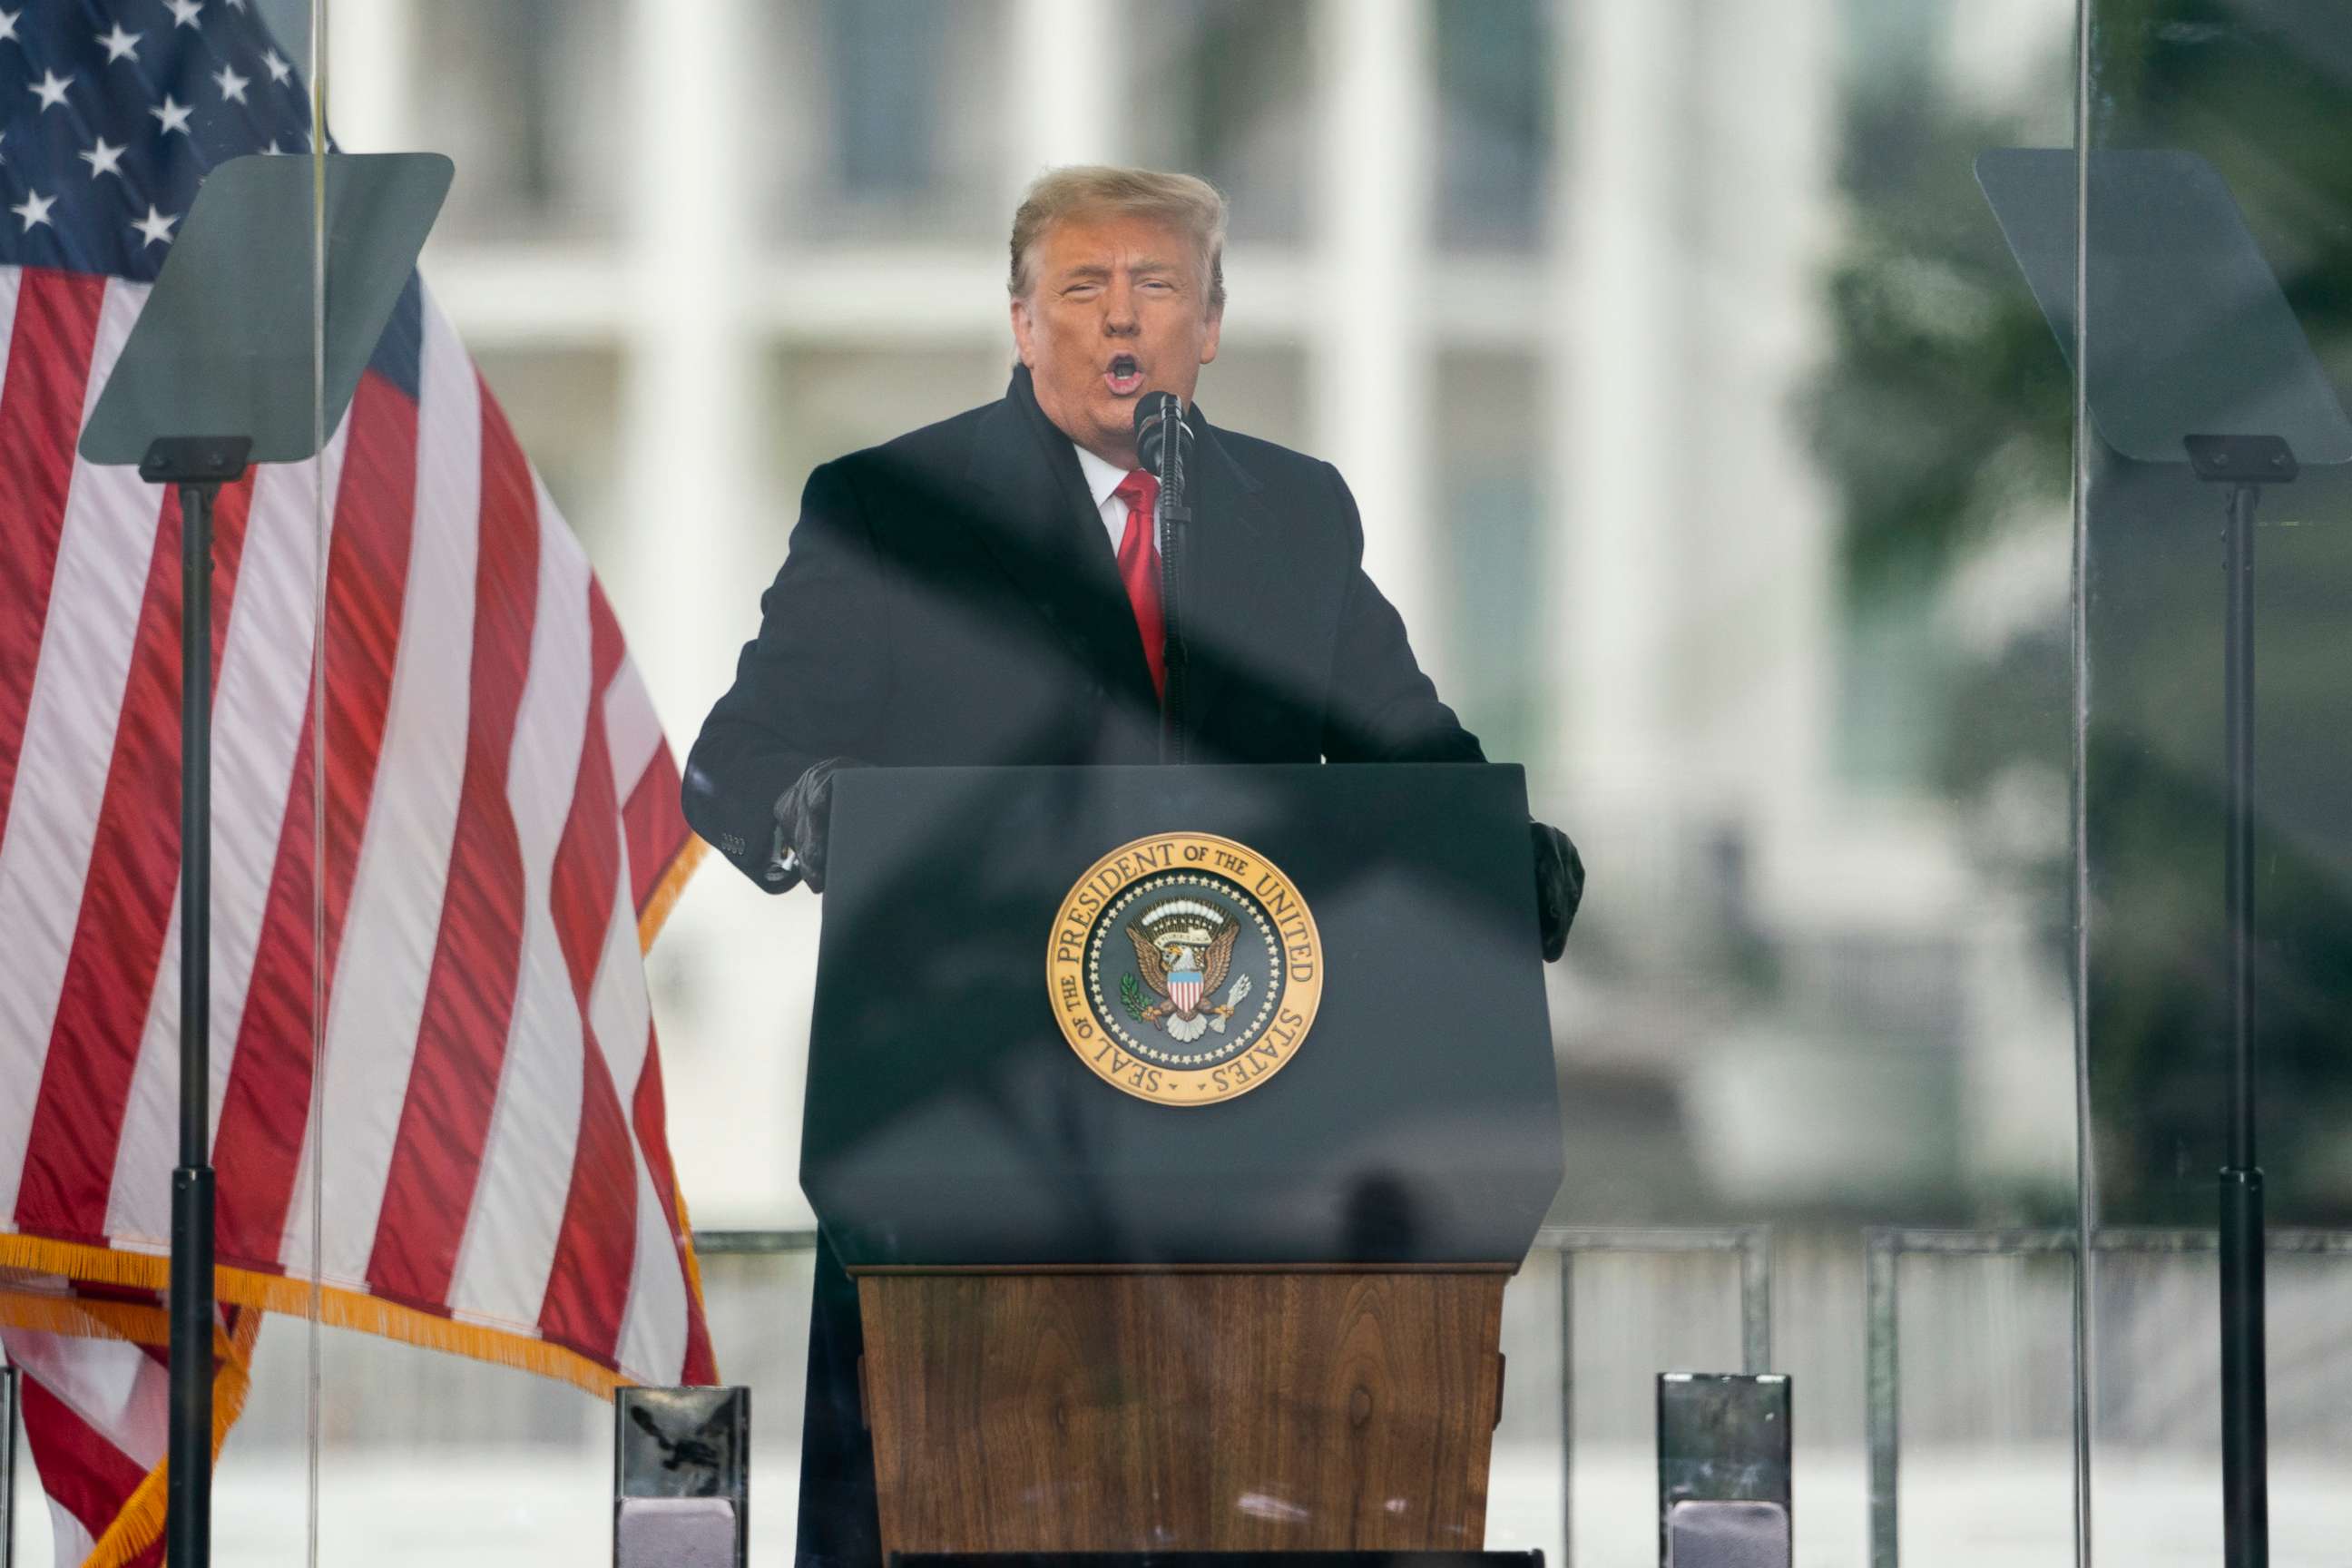 PHOTO: In this Jan. 6, 2021, file photo President Donald Trump speaks during a rally protesting the electoral college certification of Joe Biden as President in Washington, D.C.